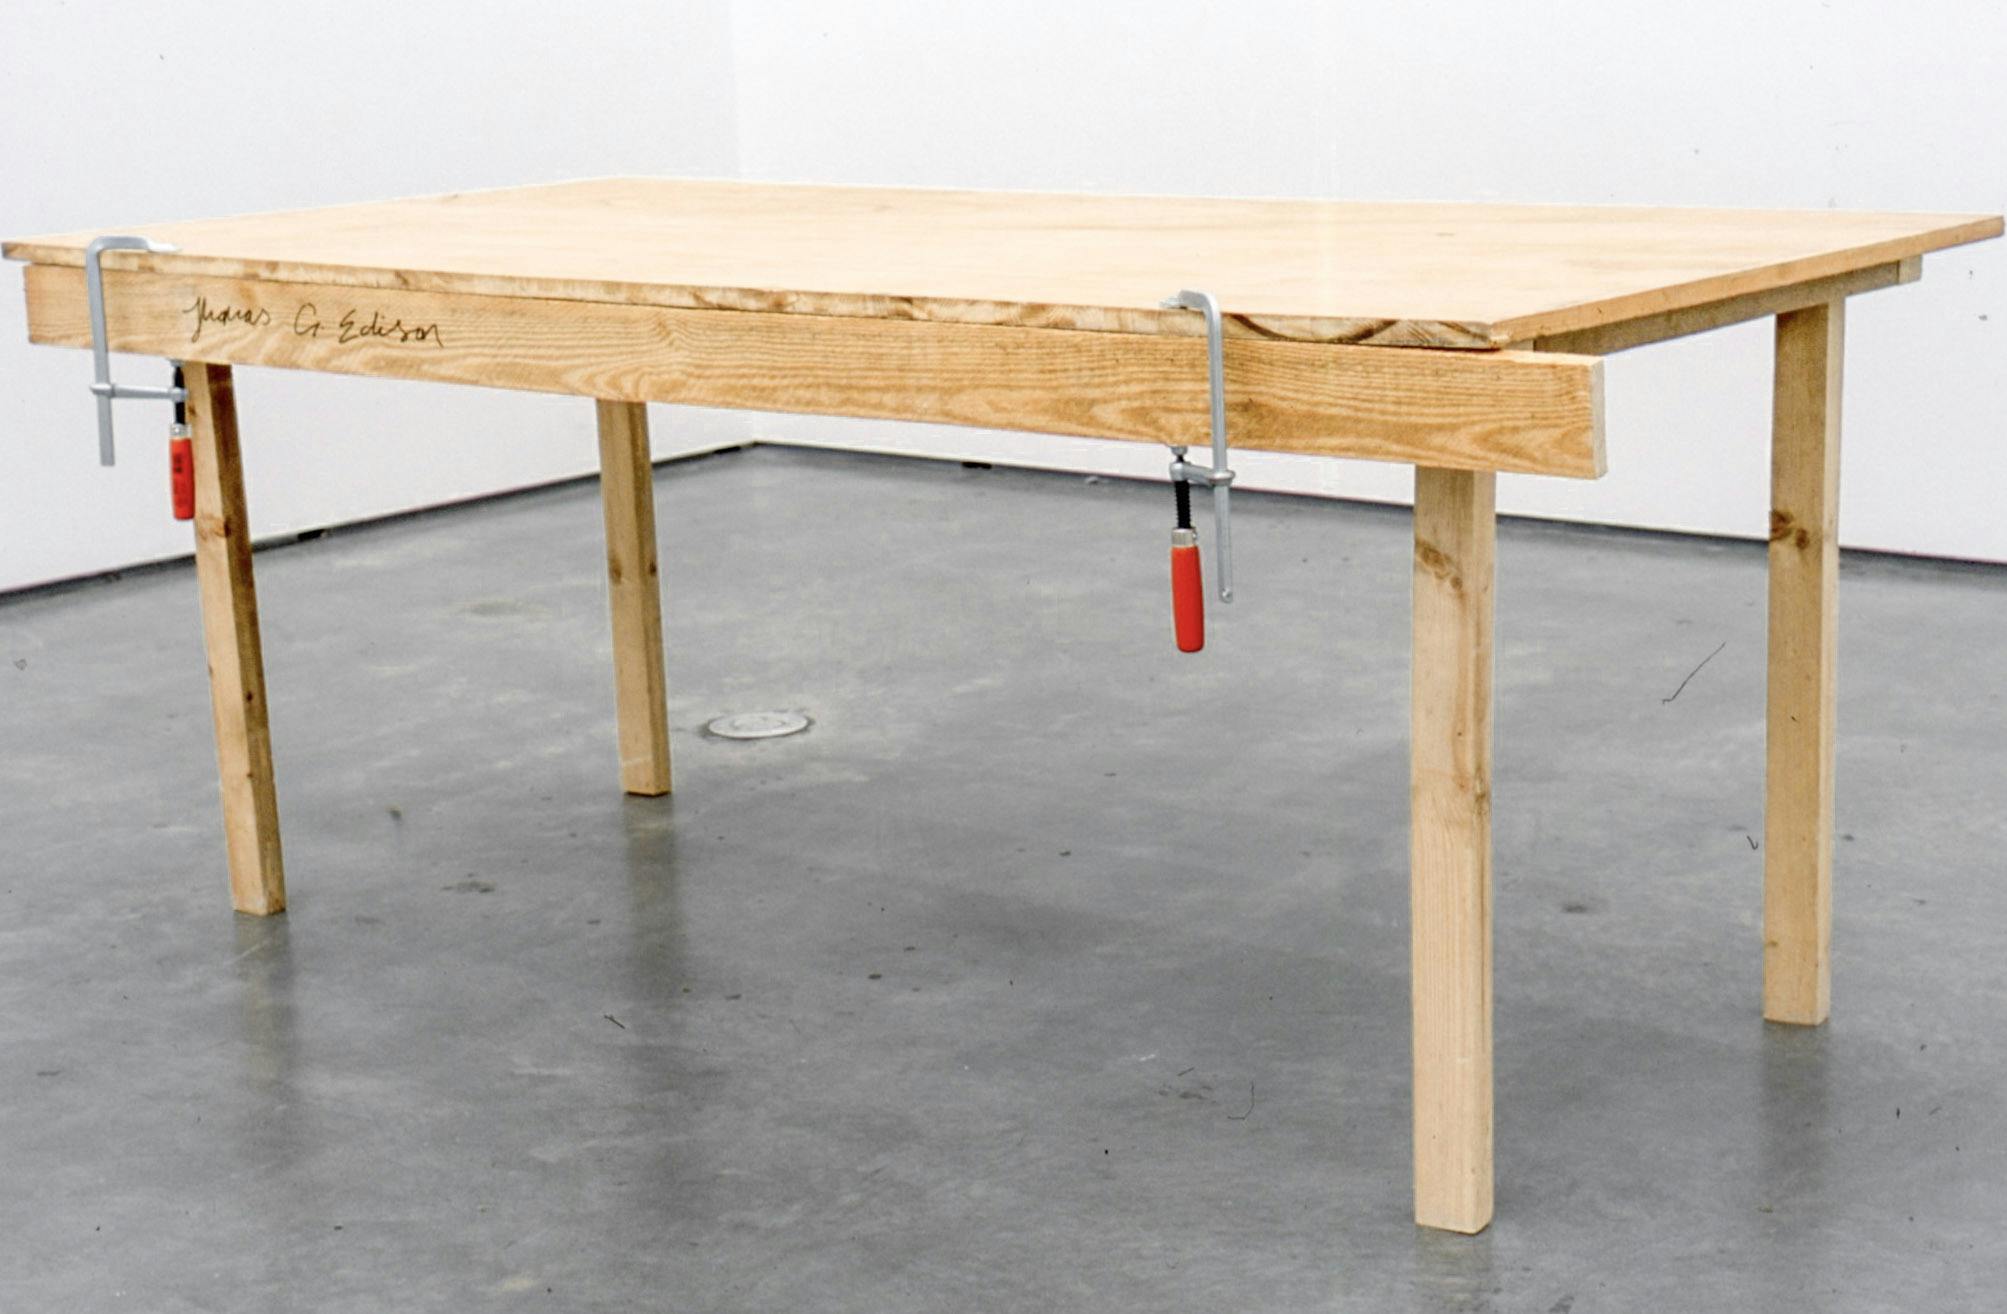 Detail of an installation work by KirstenPieroth. A wood table placed on a gallery floor has a signature that is read “Thomas G. Edison.” Two bar clamps are attached to the long side of the table.